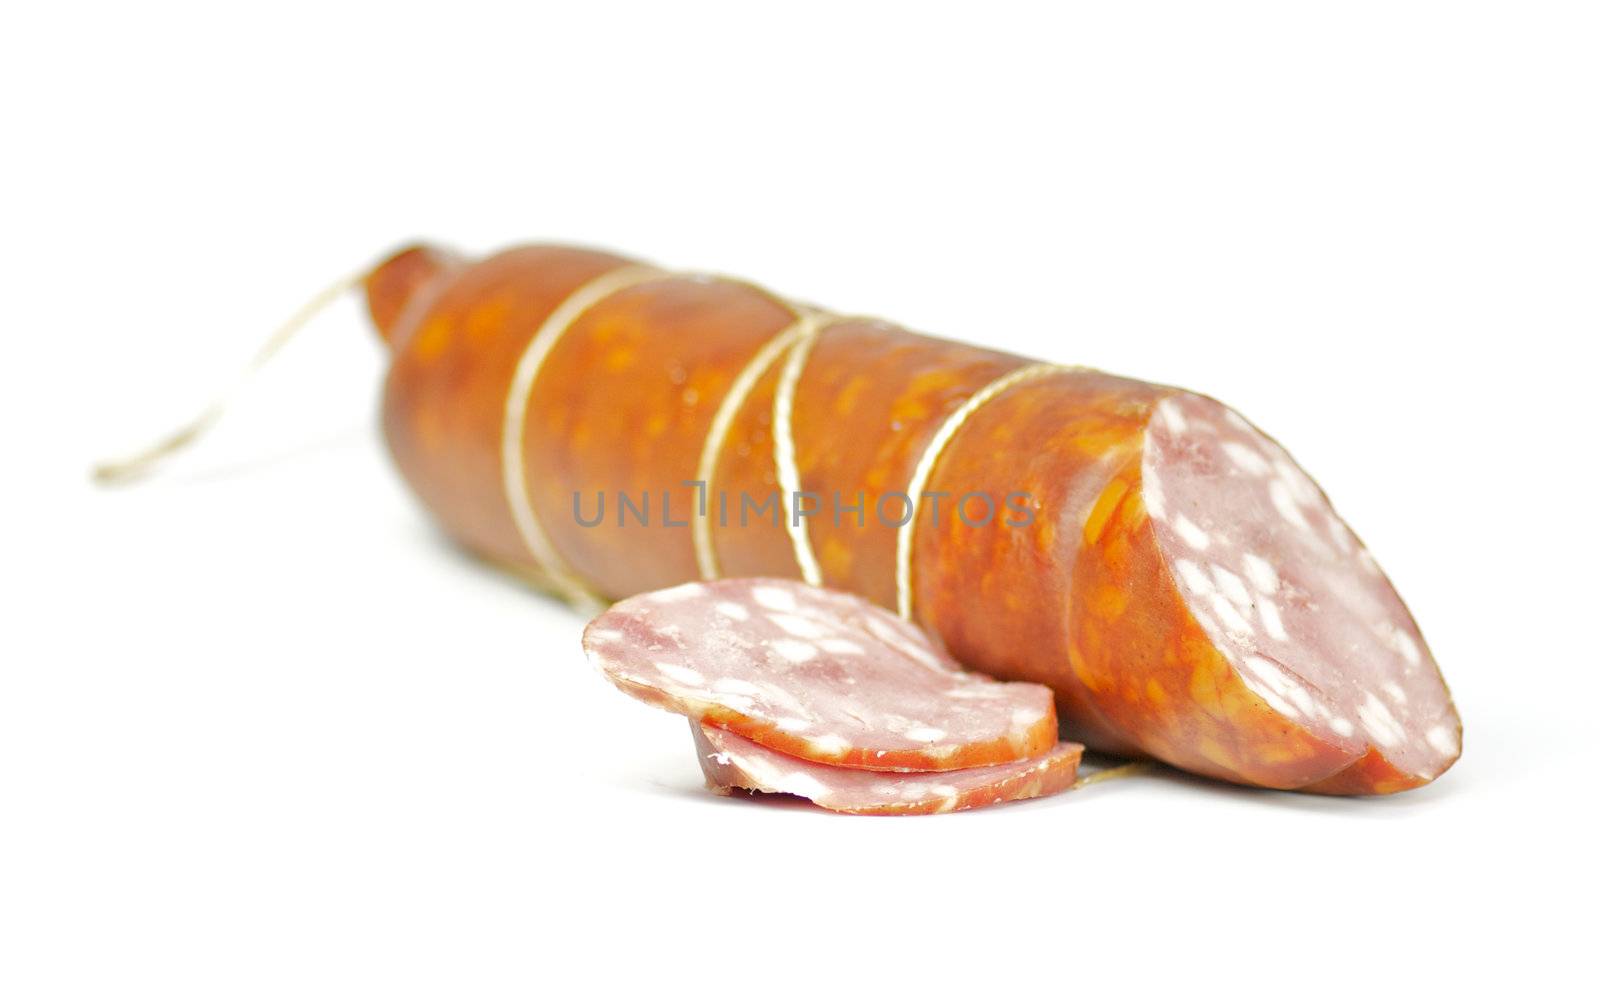 Sausage long loaf with one piece of sausage on white background